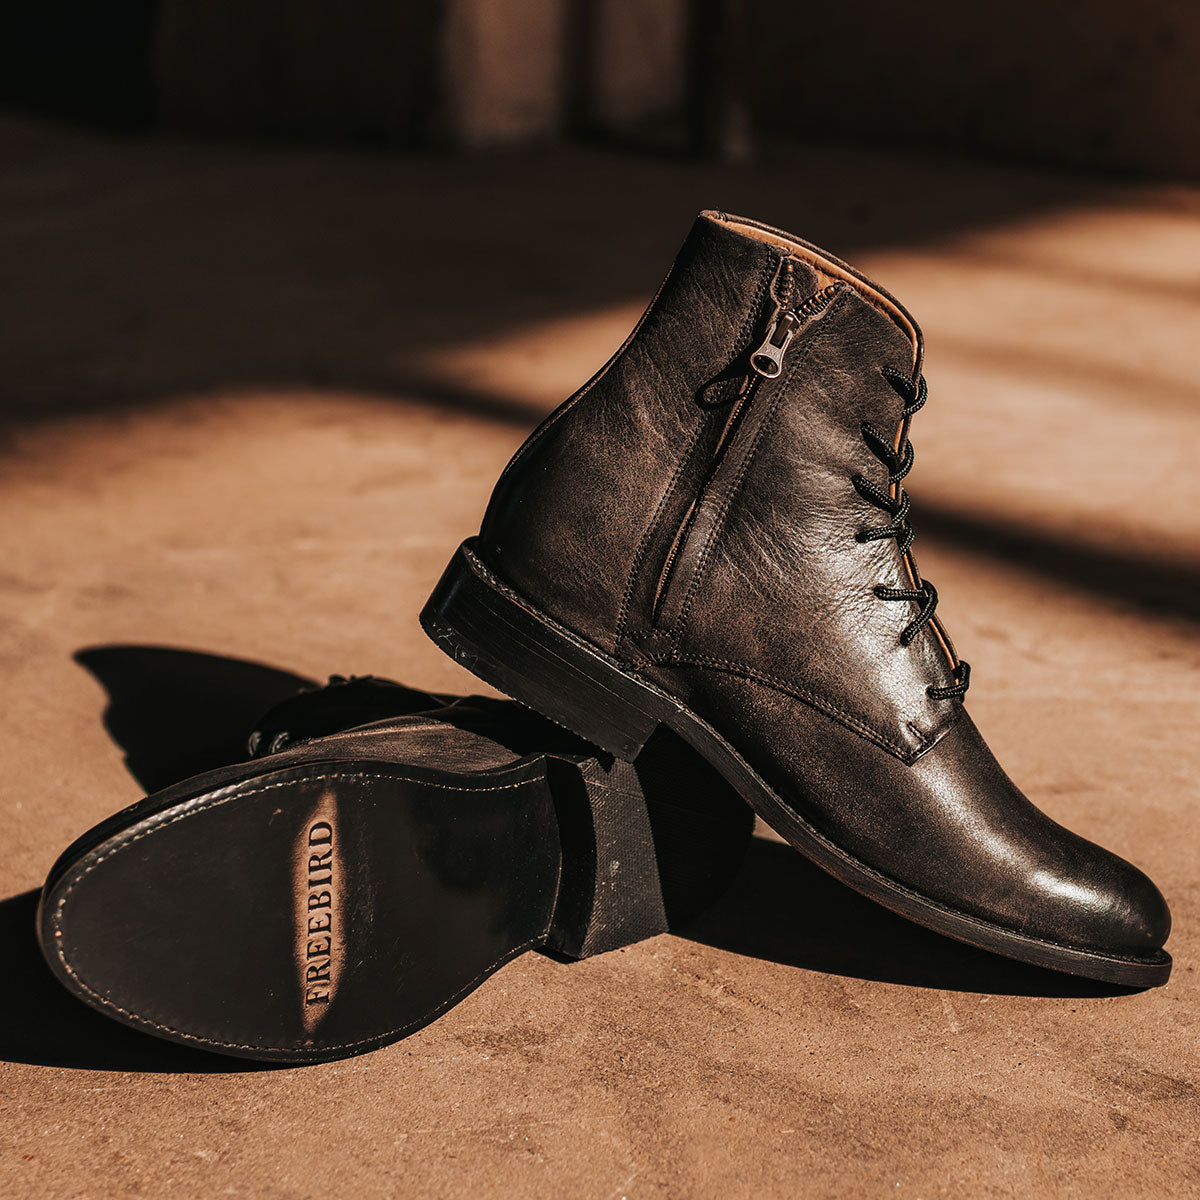 FREEBIRD men's Paxton black featuring an inside zip closure, leather zipper cover and lace up detailing